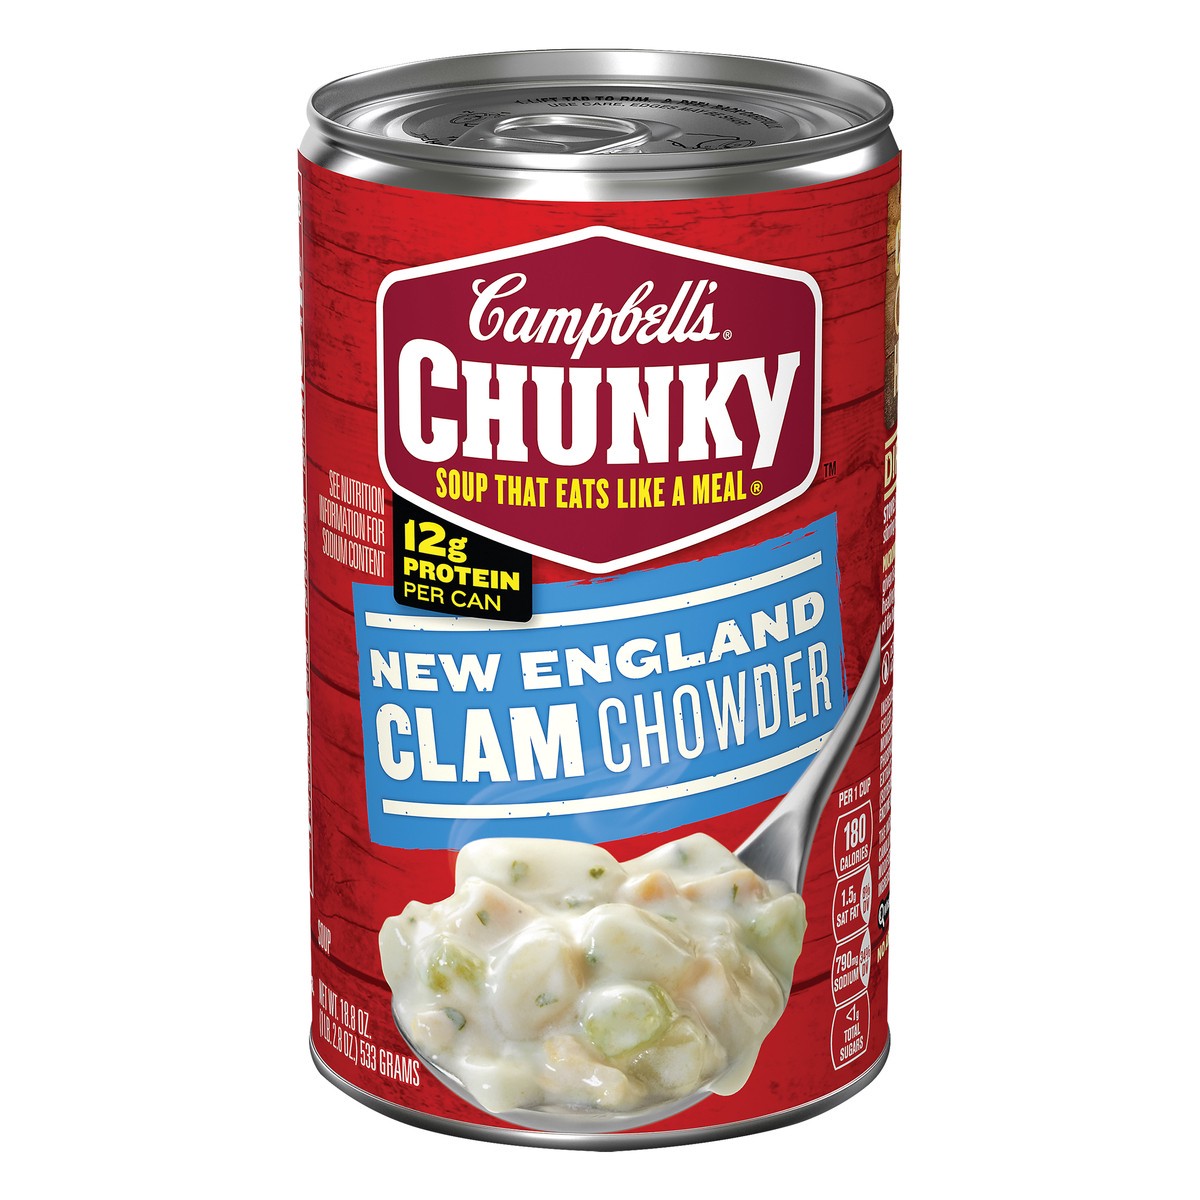 slide 1 of 104, Campbell's Chunky New England Clam Chowder Soup, 18.8 oz